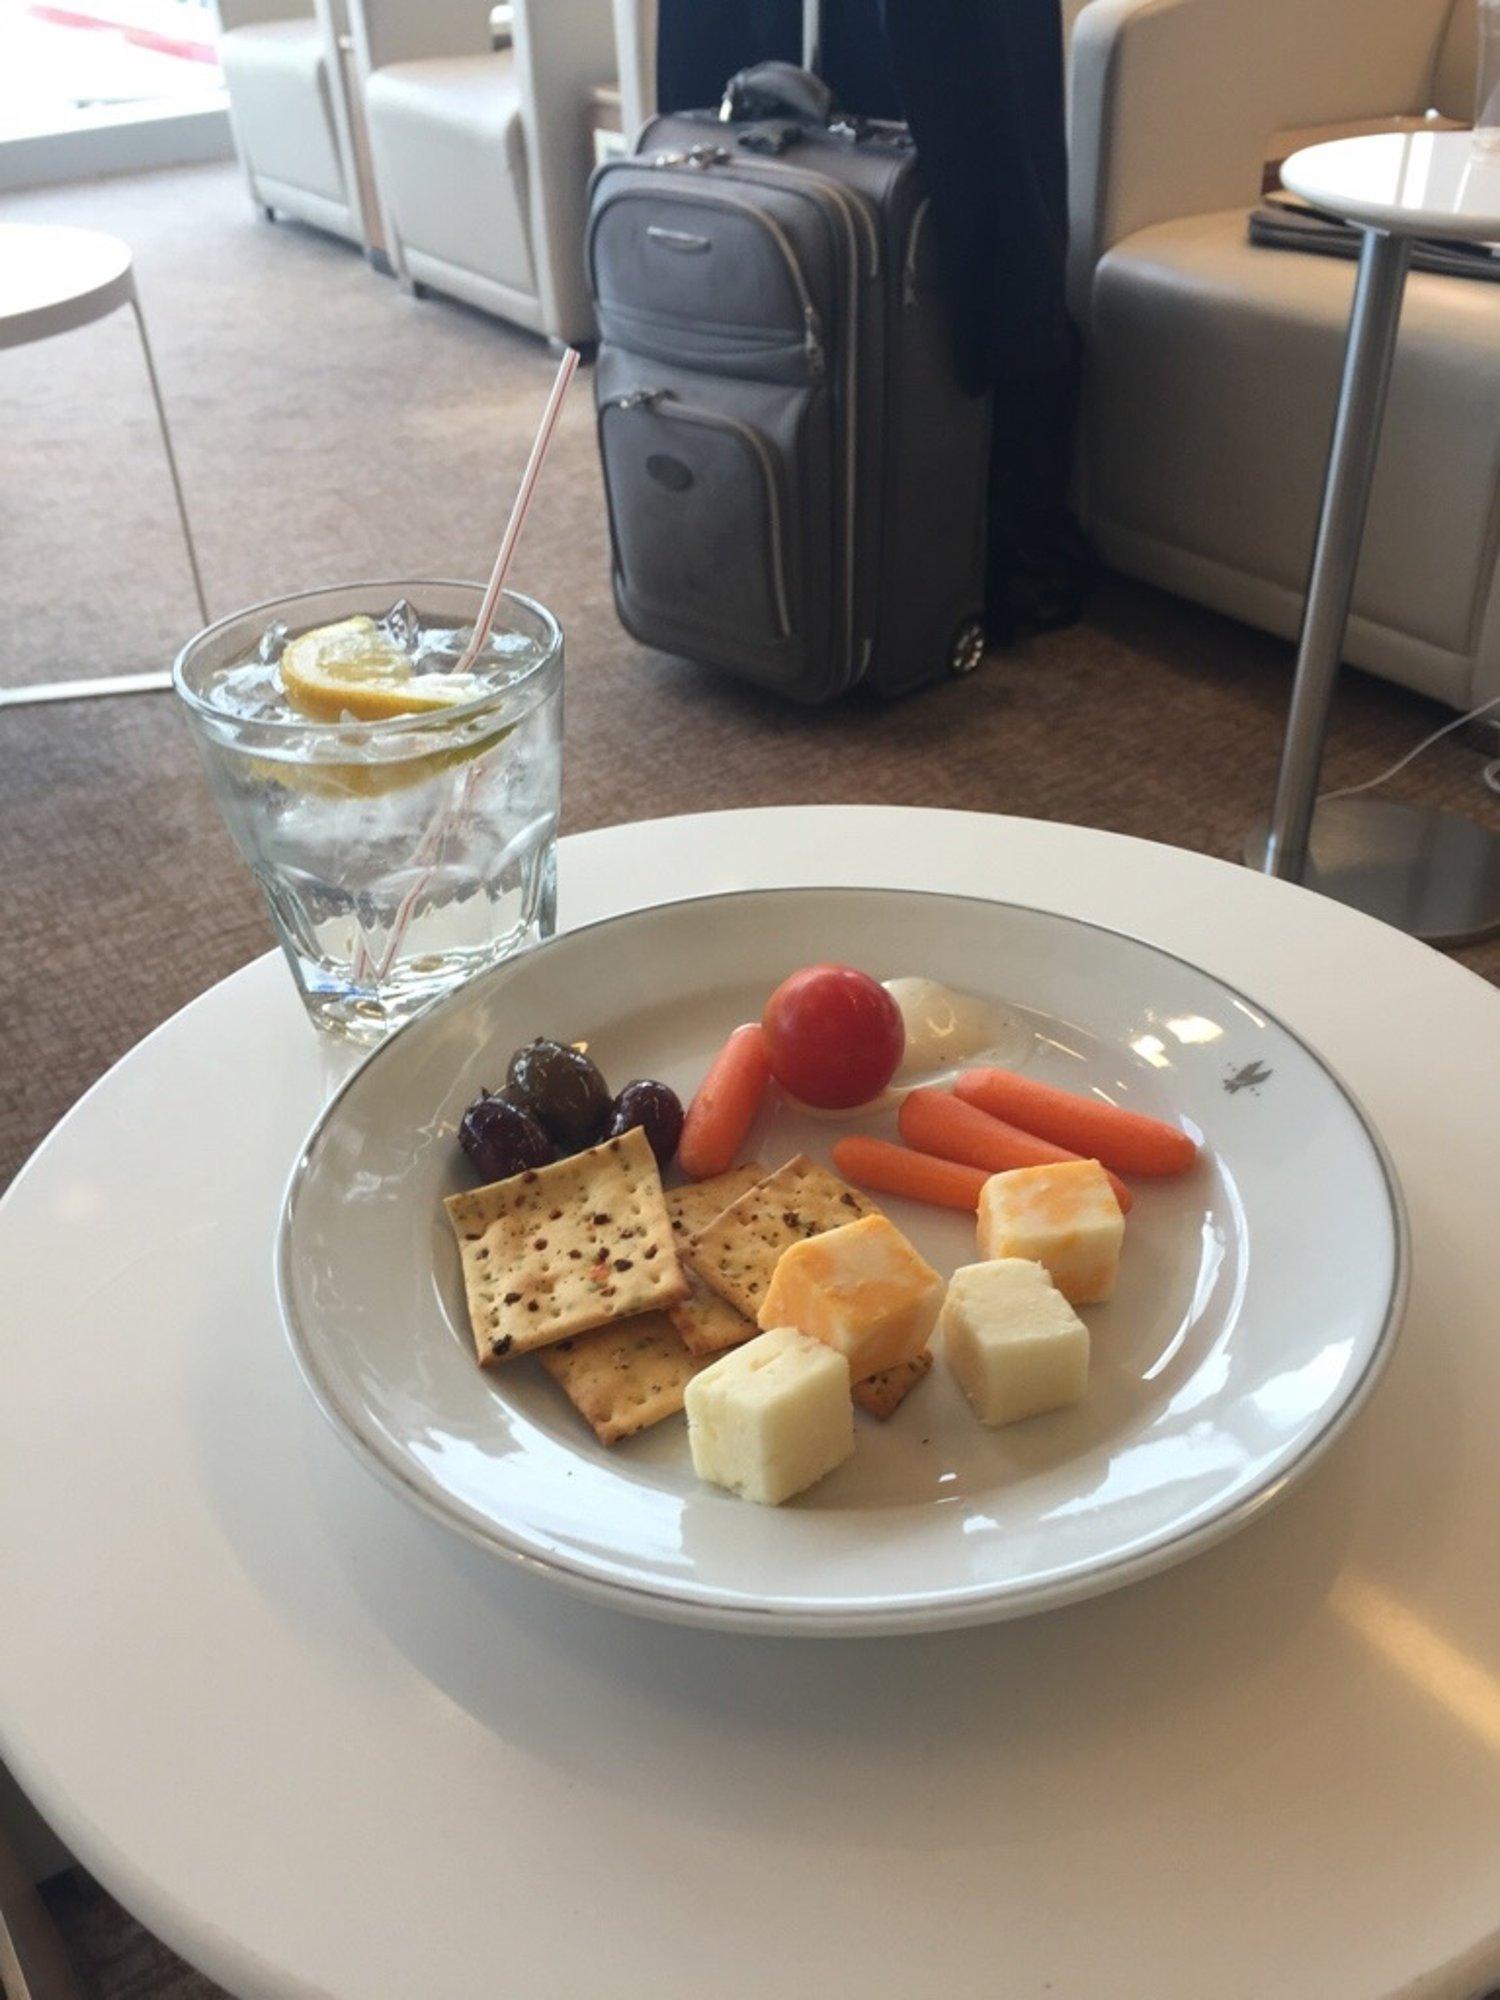 American Airlines Admirals Club image 18 of 50